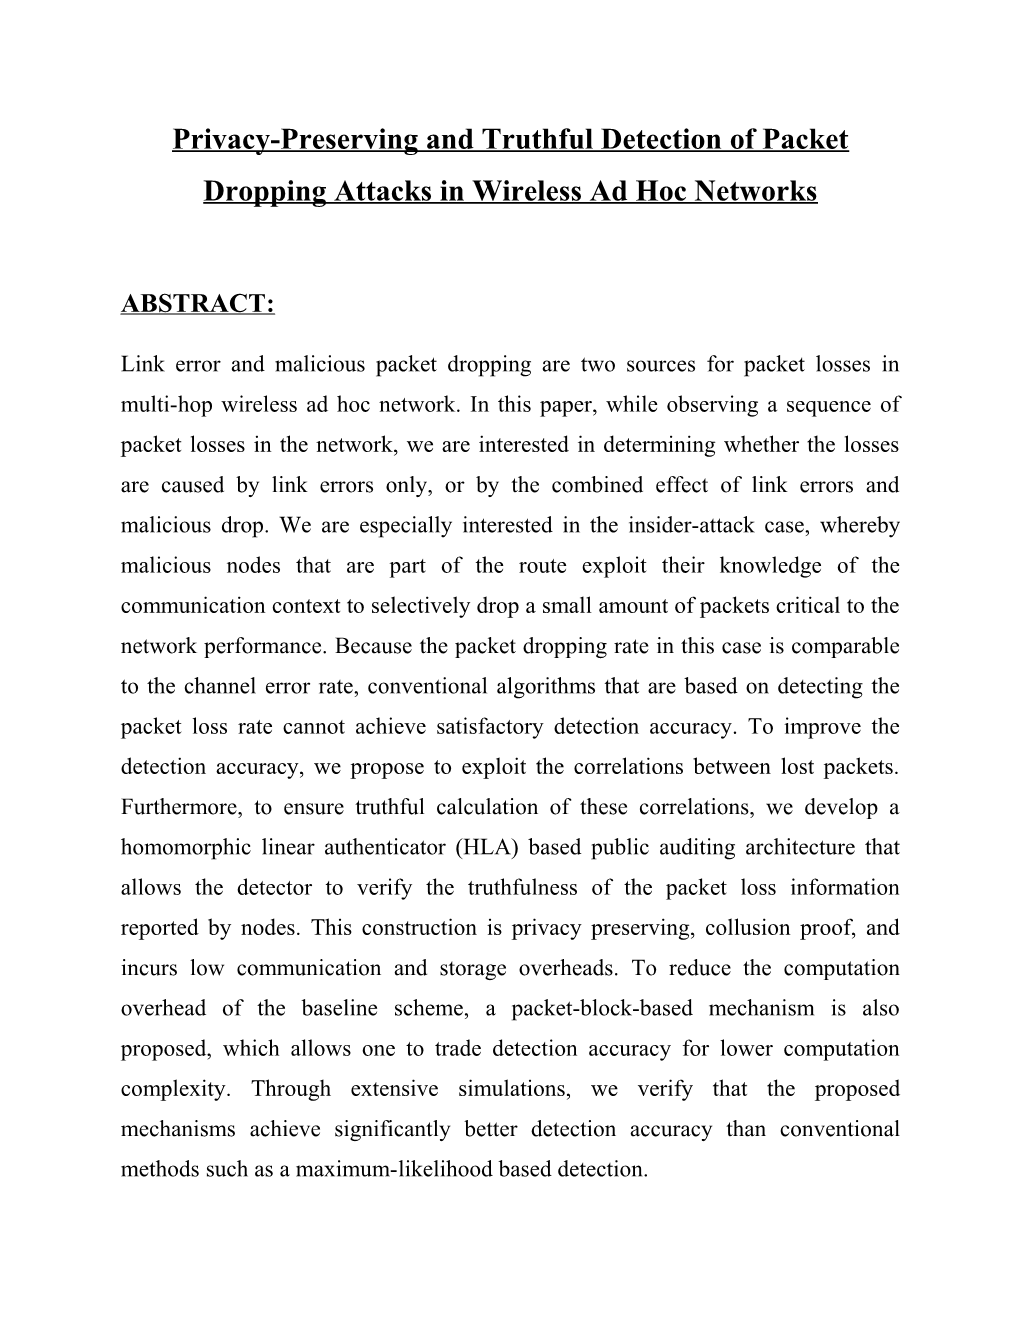 Privacy-Preserving and Truthful Detection of Packet Dropping Attacks in Wireless Ad Hoc Networks